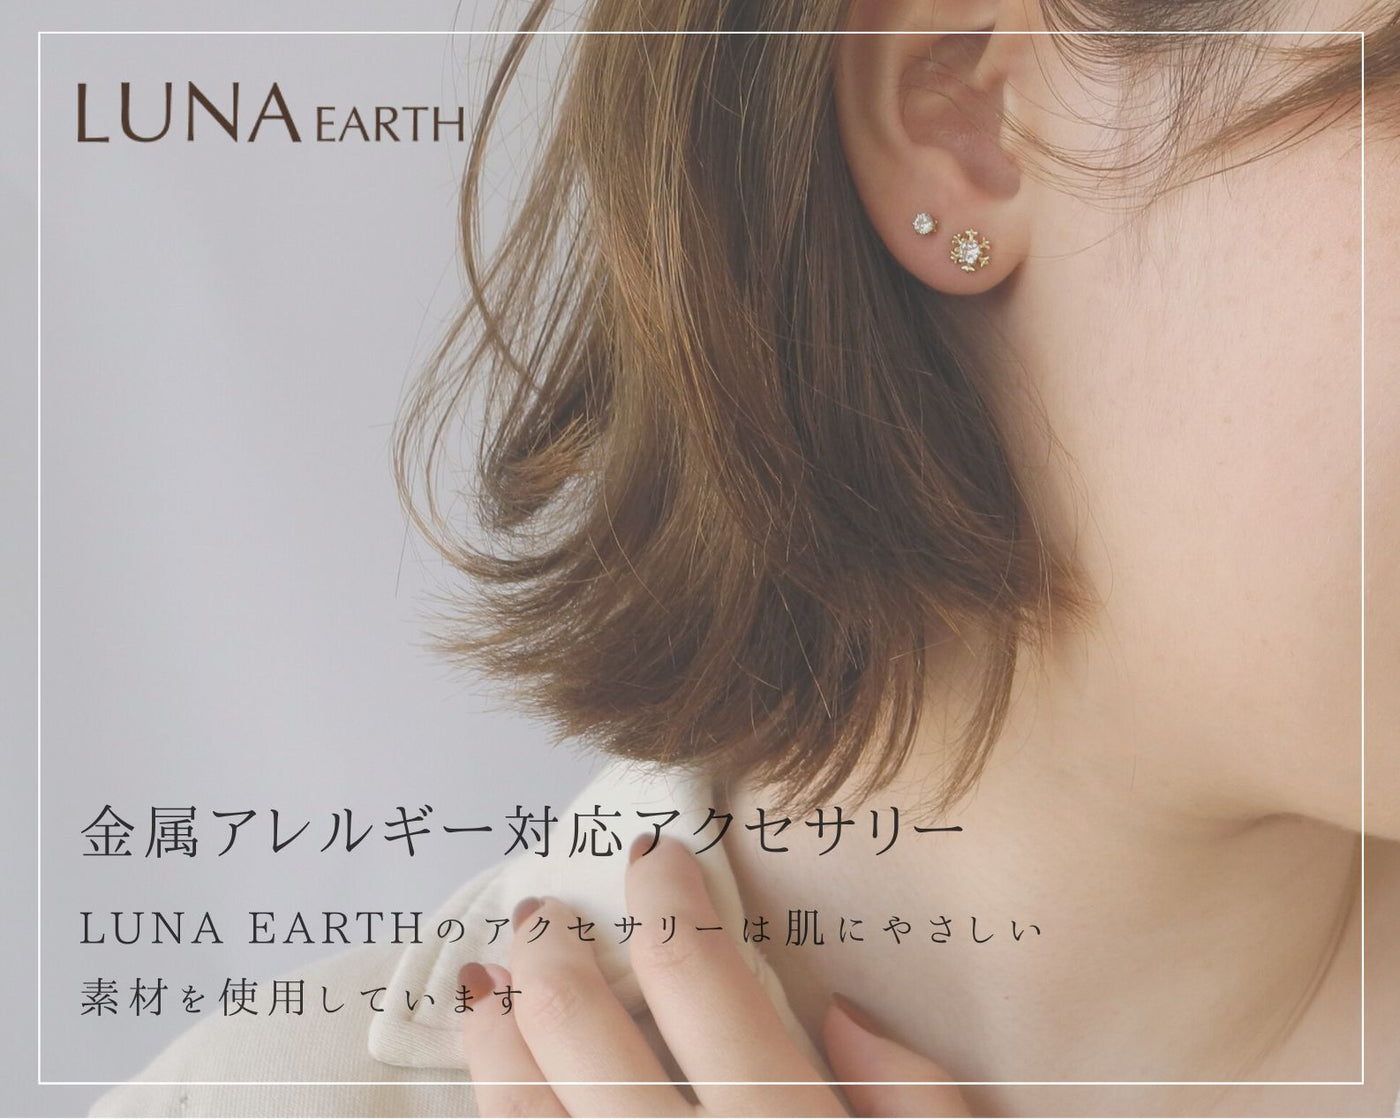 LUNA EARTH ONLINE|ルナアース公式通販サイト